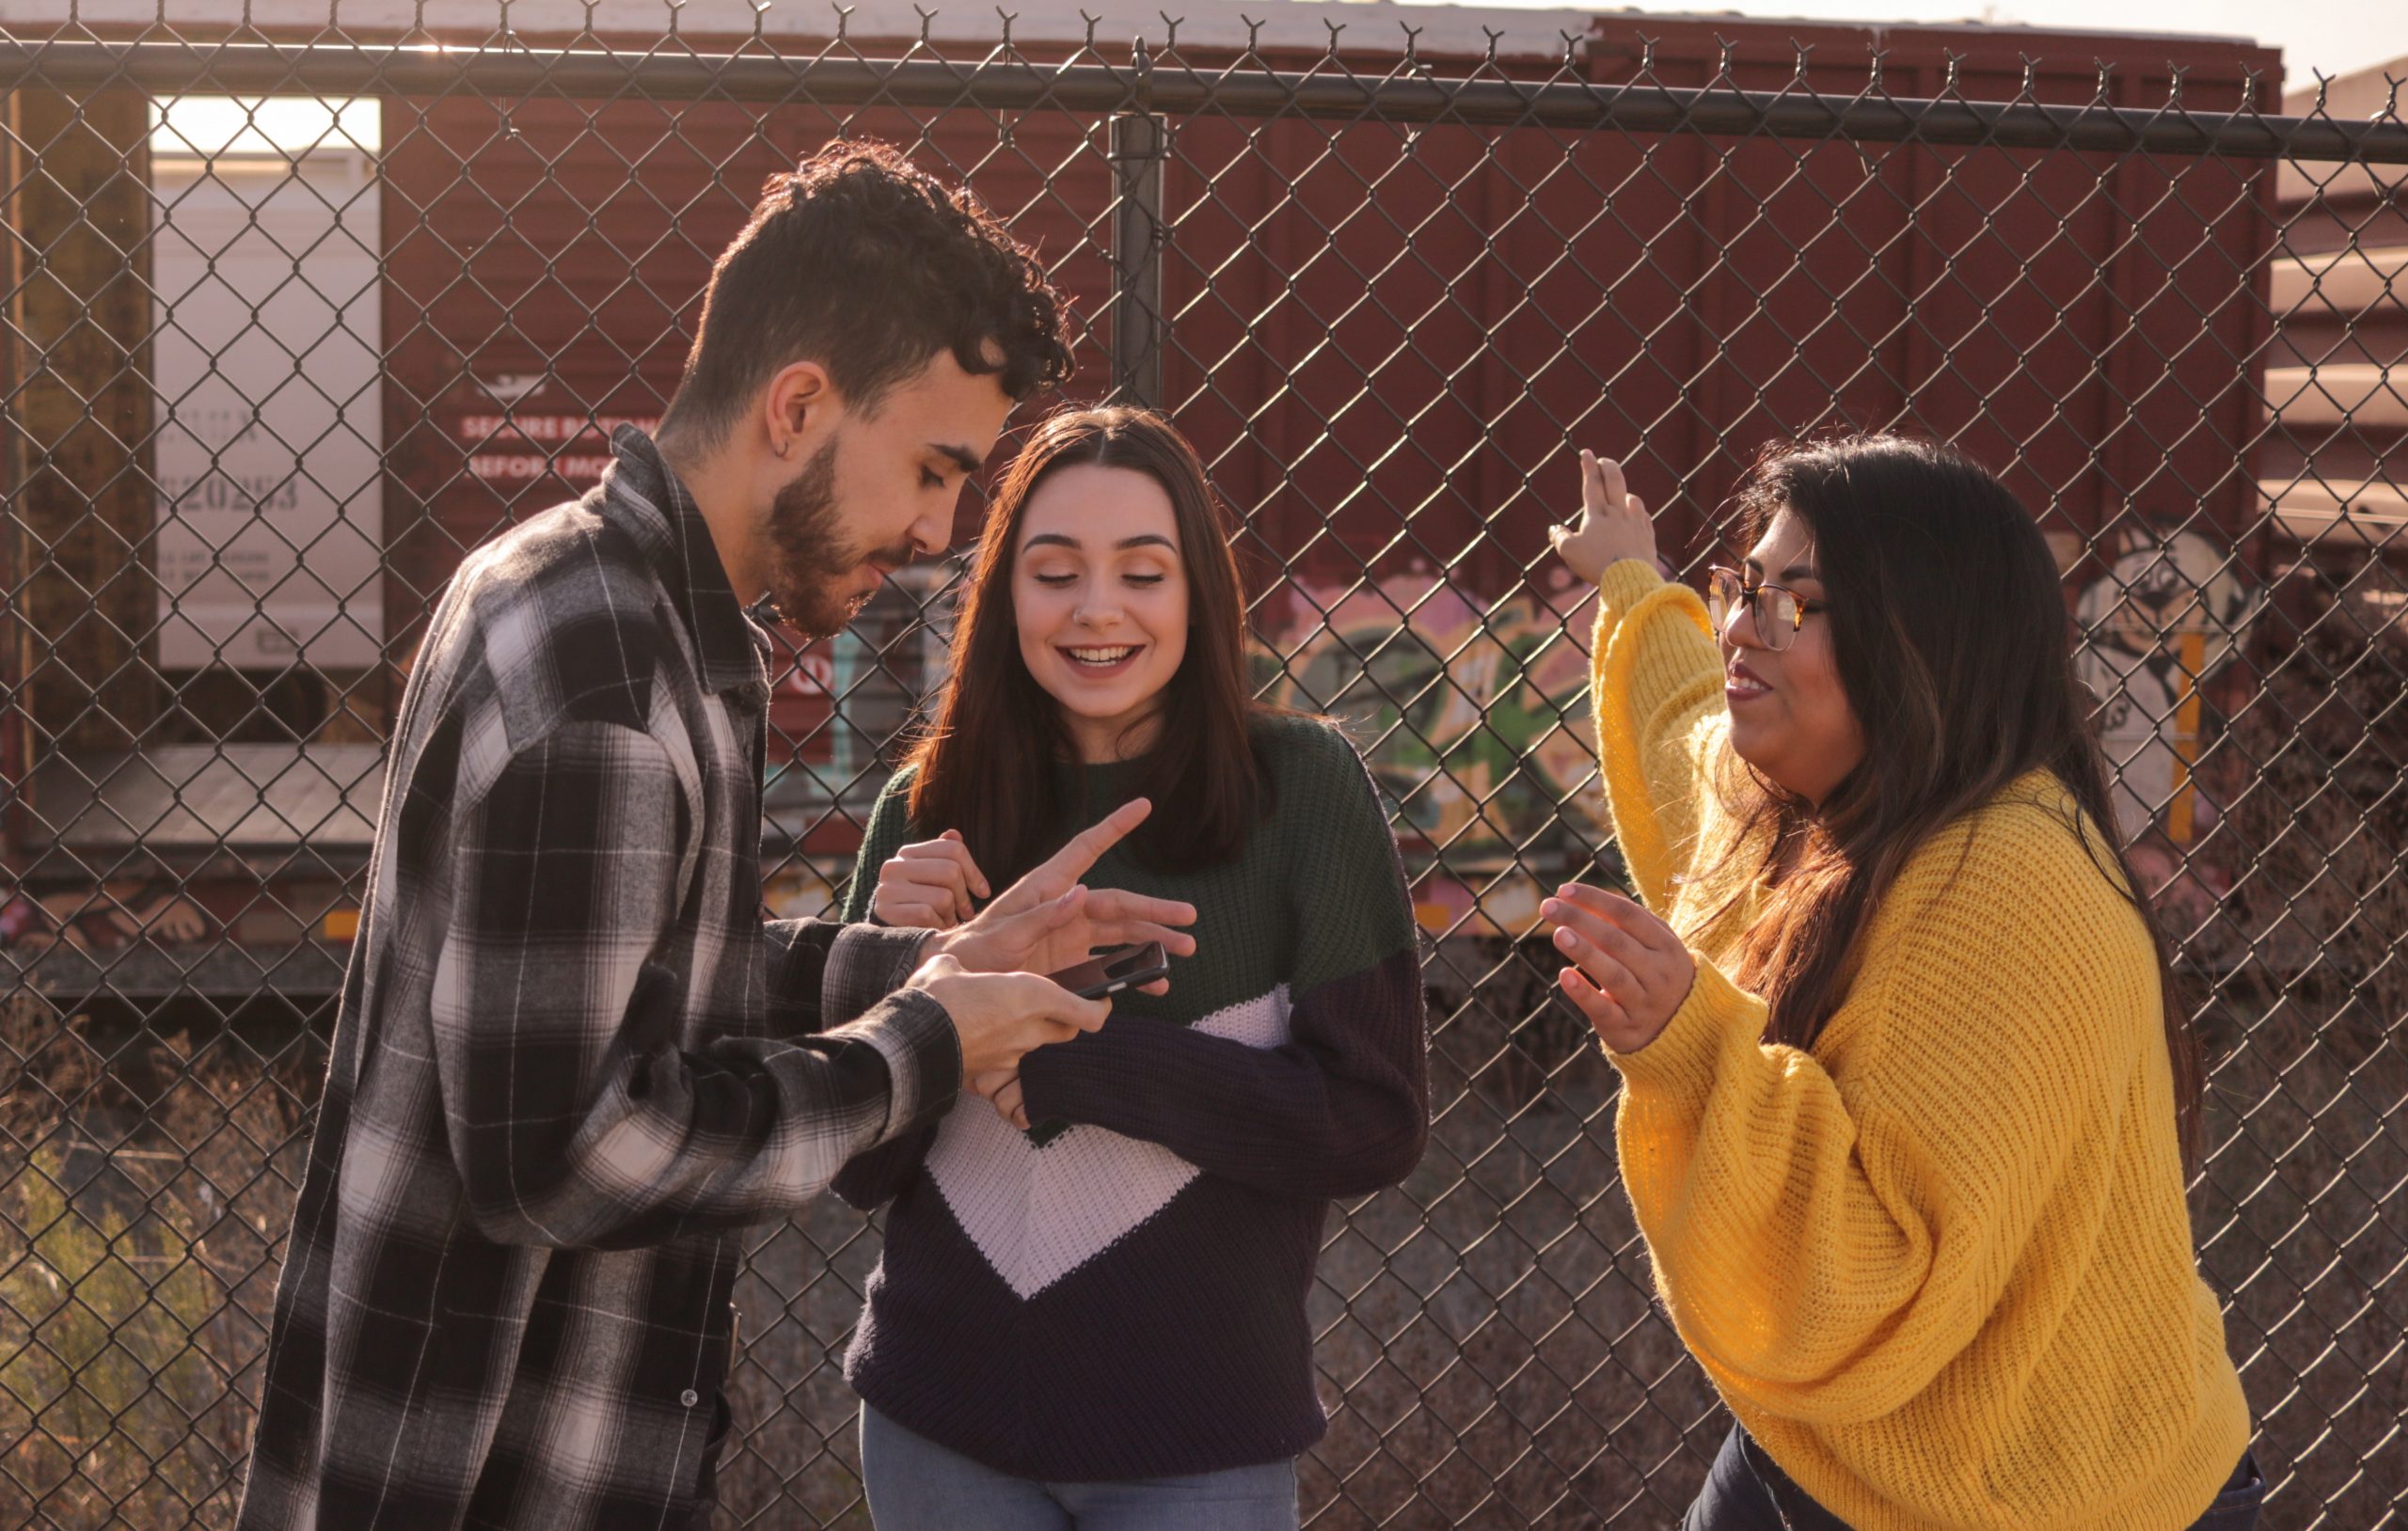 Three teens are leaning against fence and looking at a cellphone